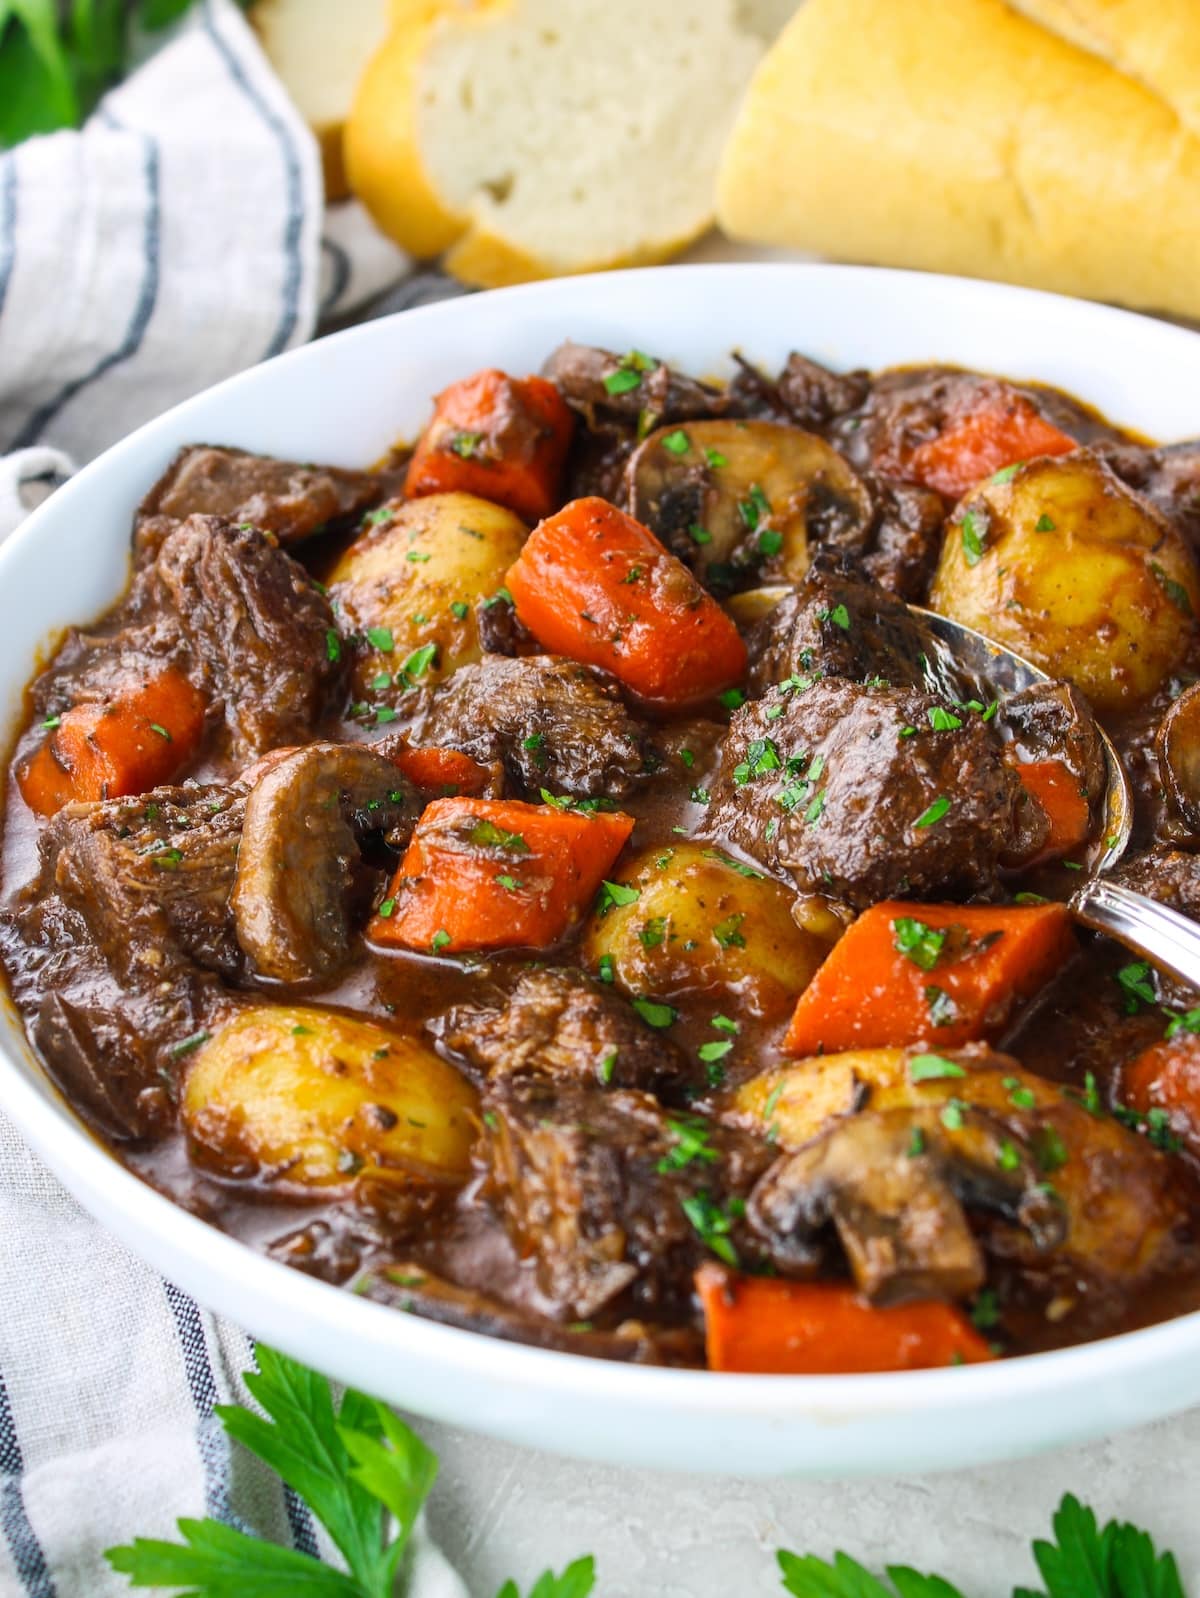 Stew in a bowl with beef, carrots, and potatoes with bread on the side.